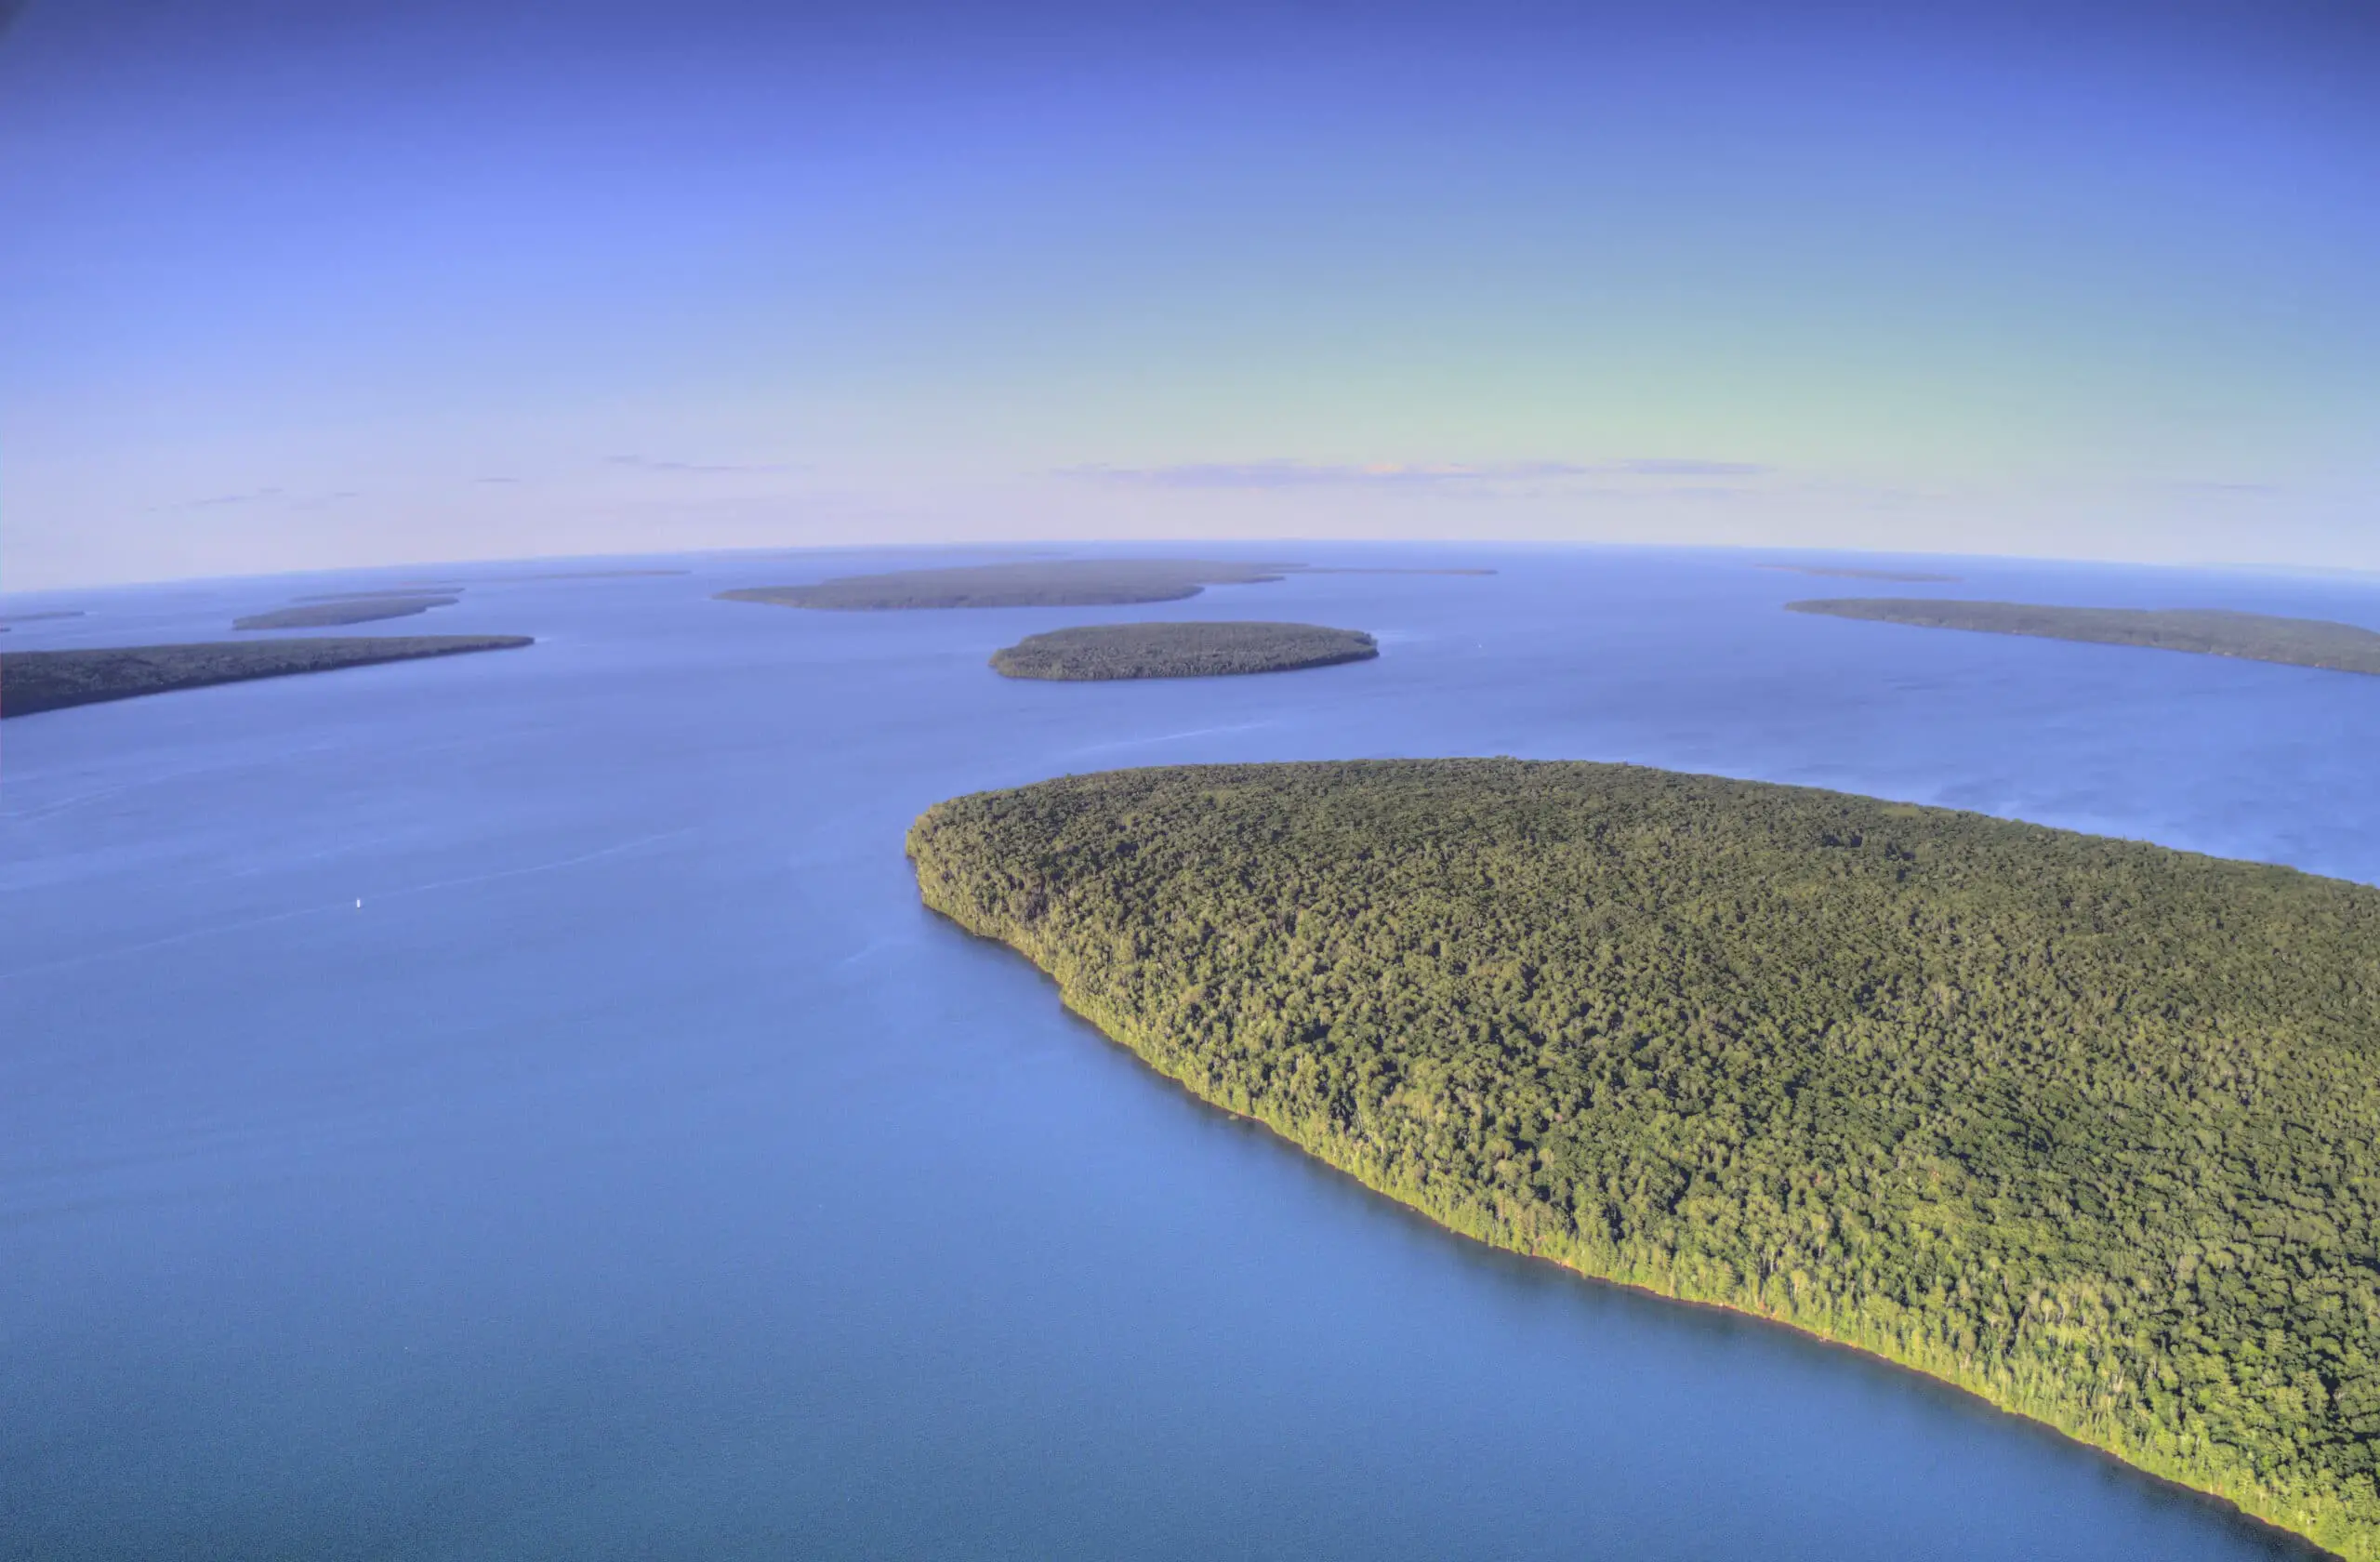 Aerial View of the Apostle Islands National Lakeshore in Lake Superior